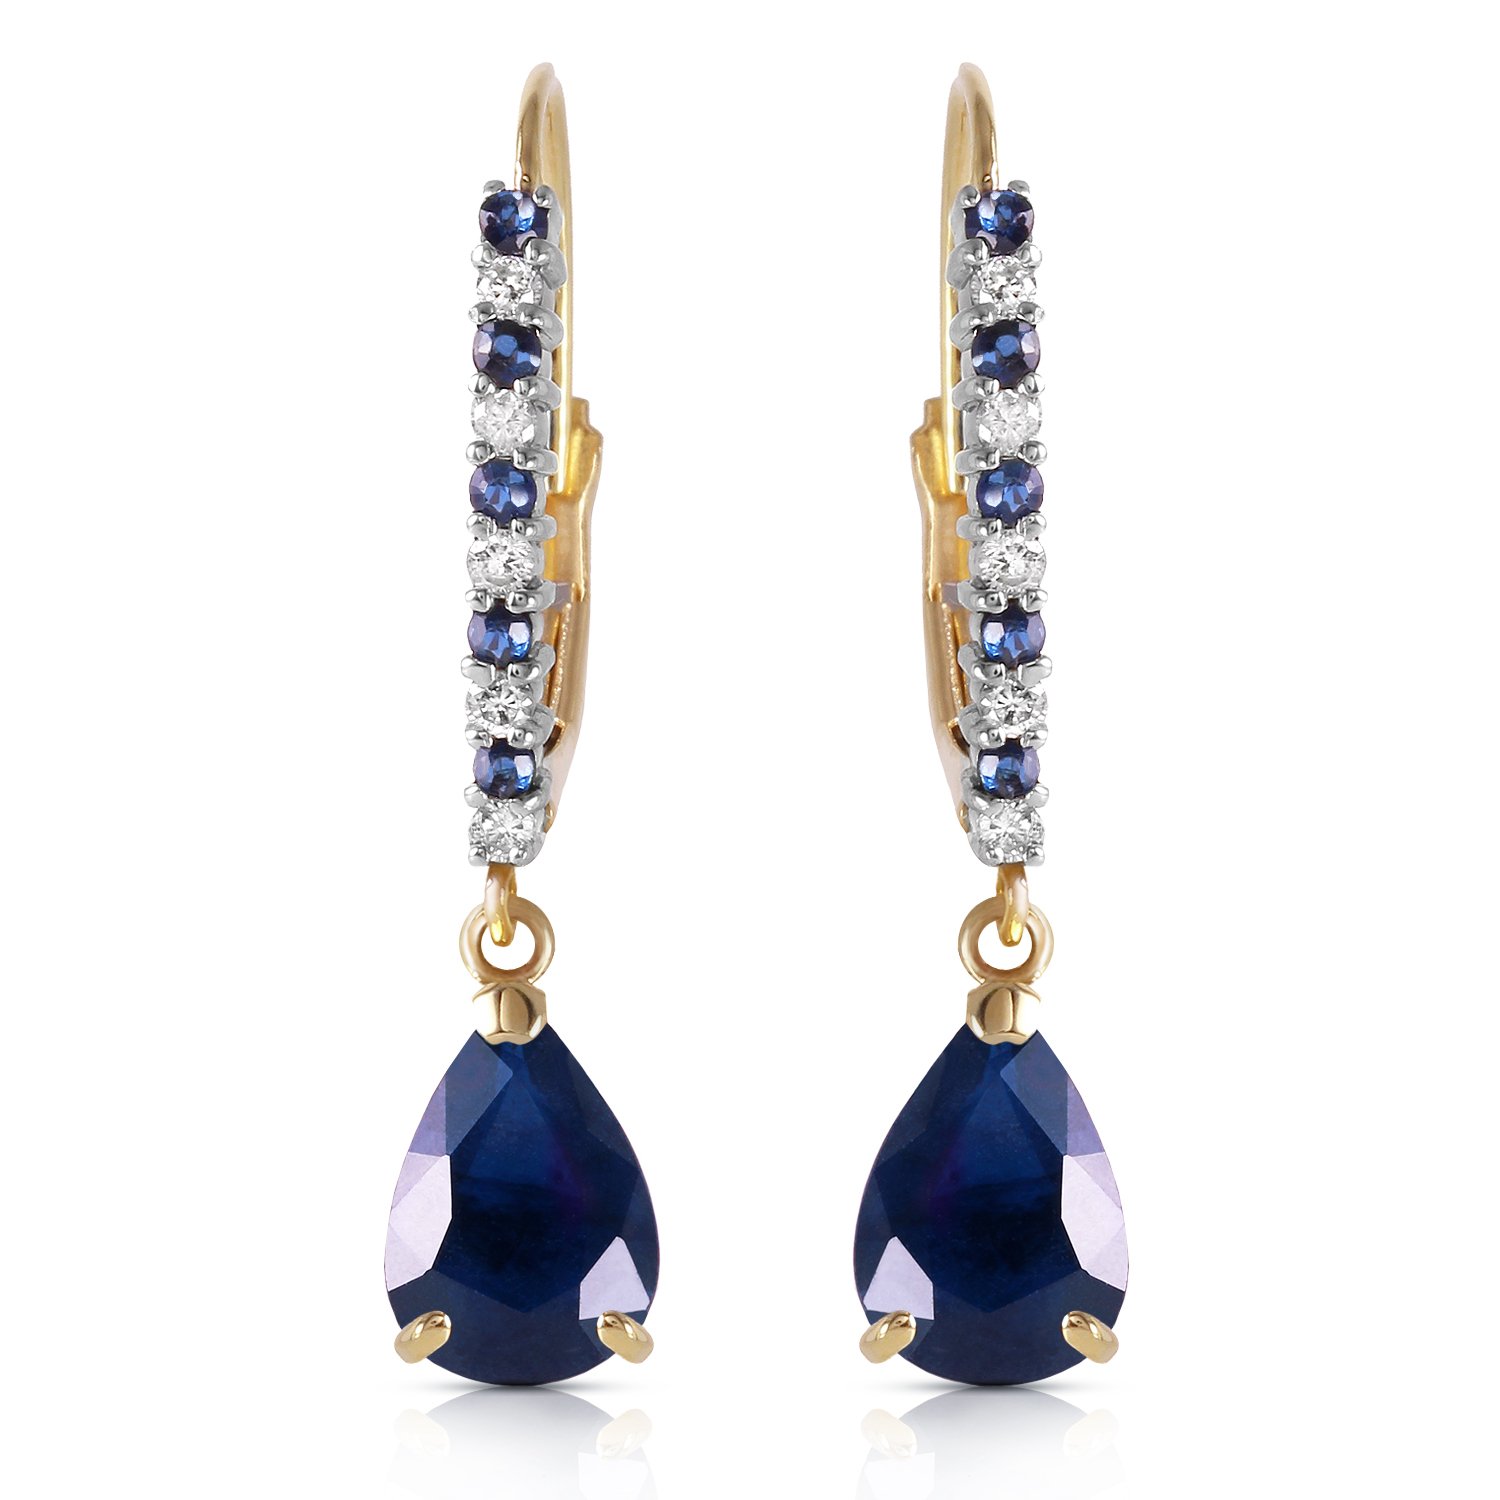 Galaxy Gold GG 3.35 Carat 14k Solid Gold Leverback Earrings with Natural Diamonds and Sapphires